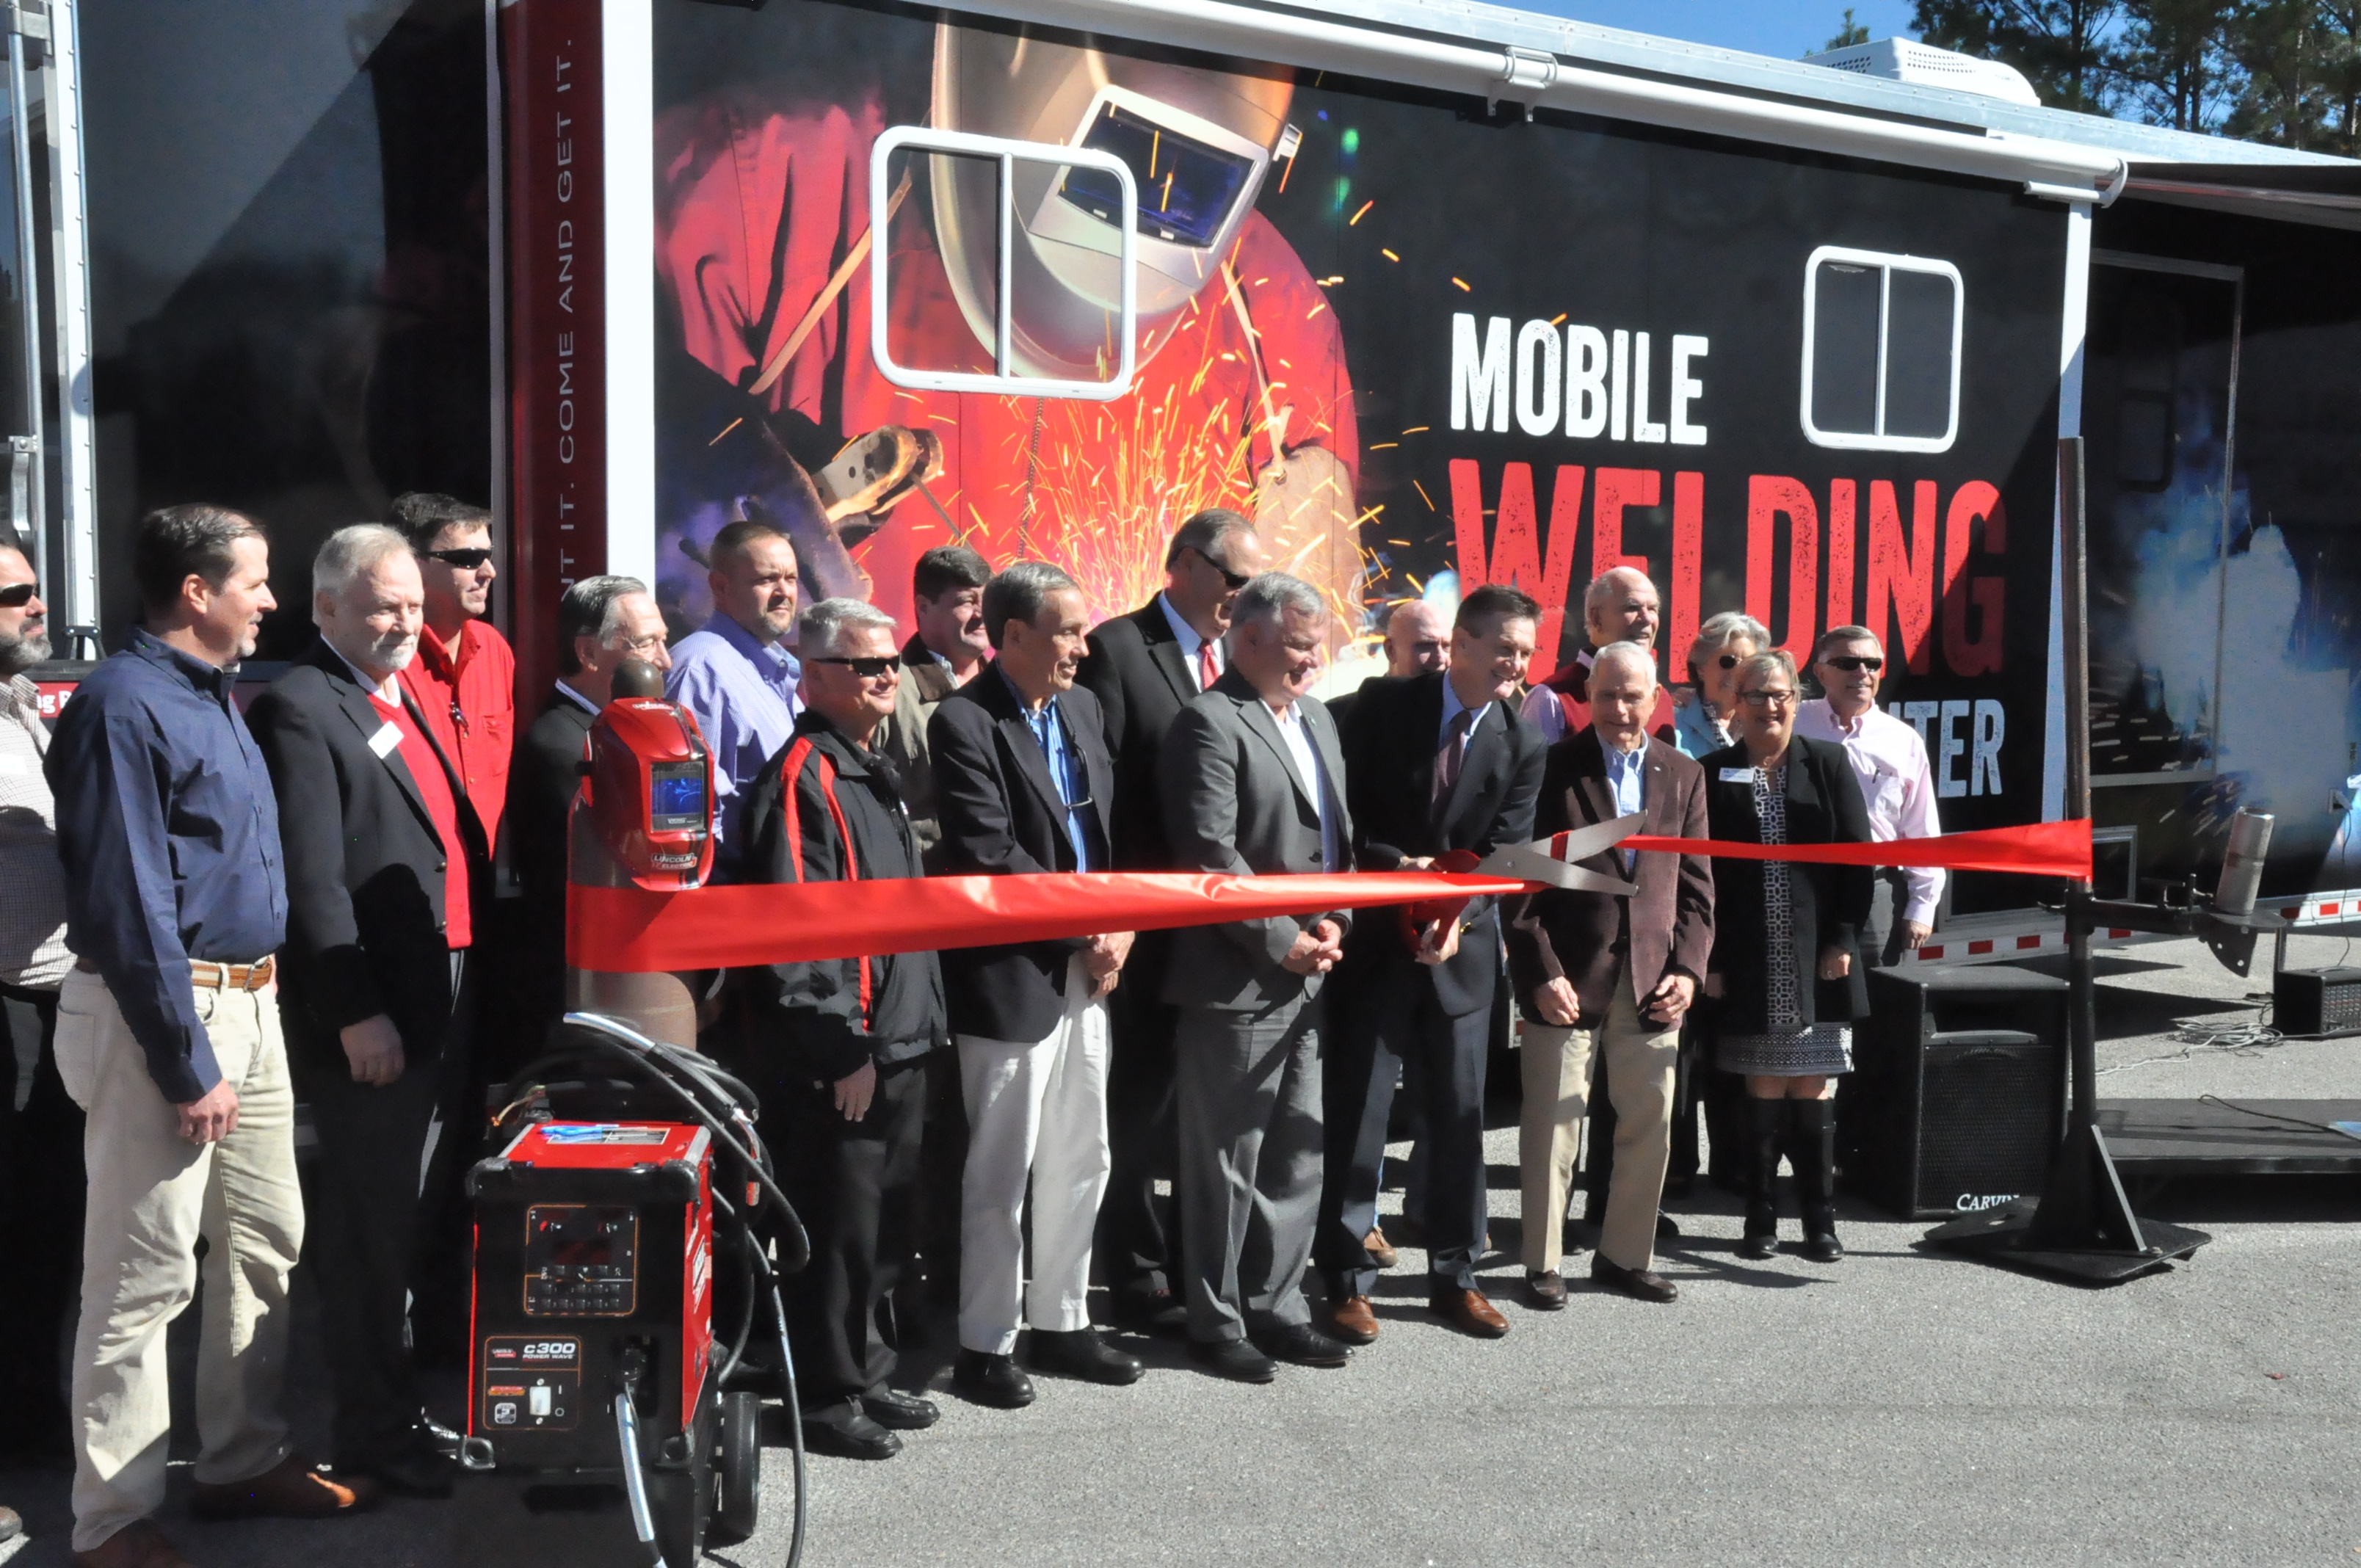 TCL Mobile Welding Center